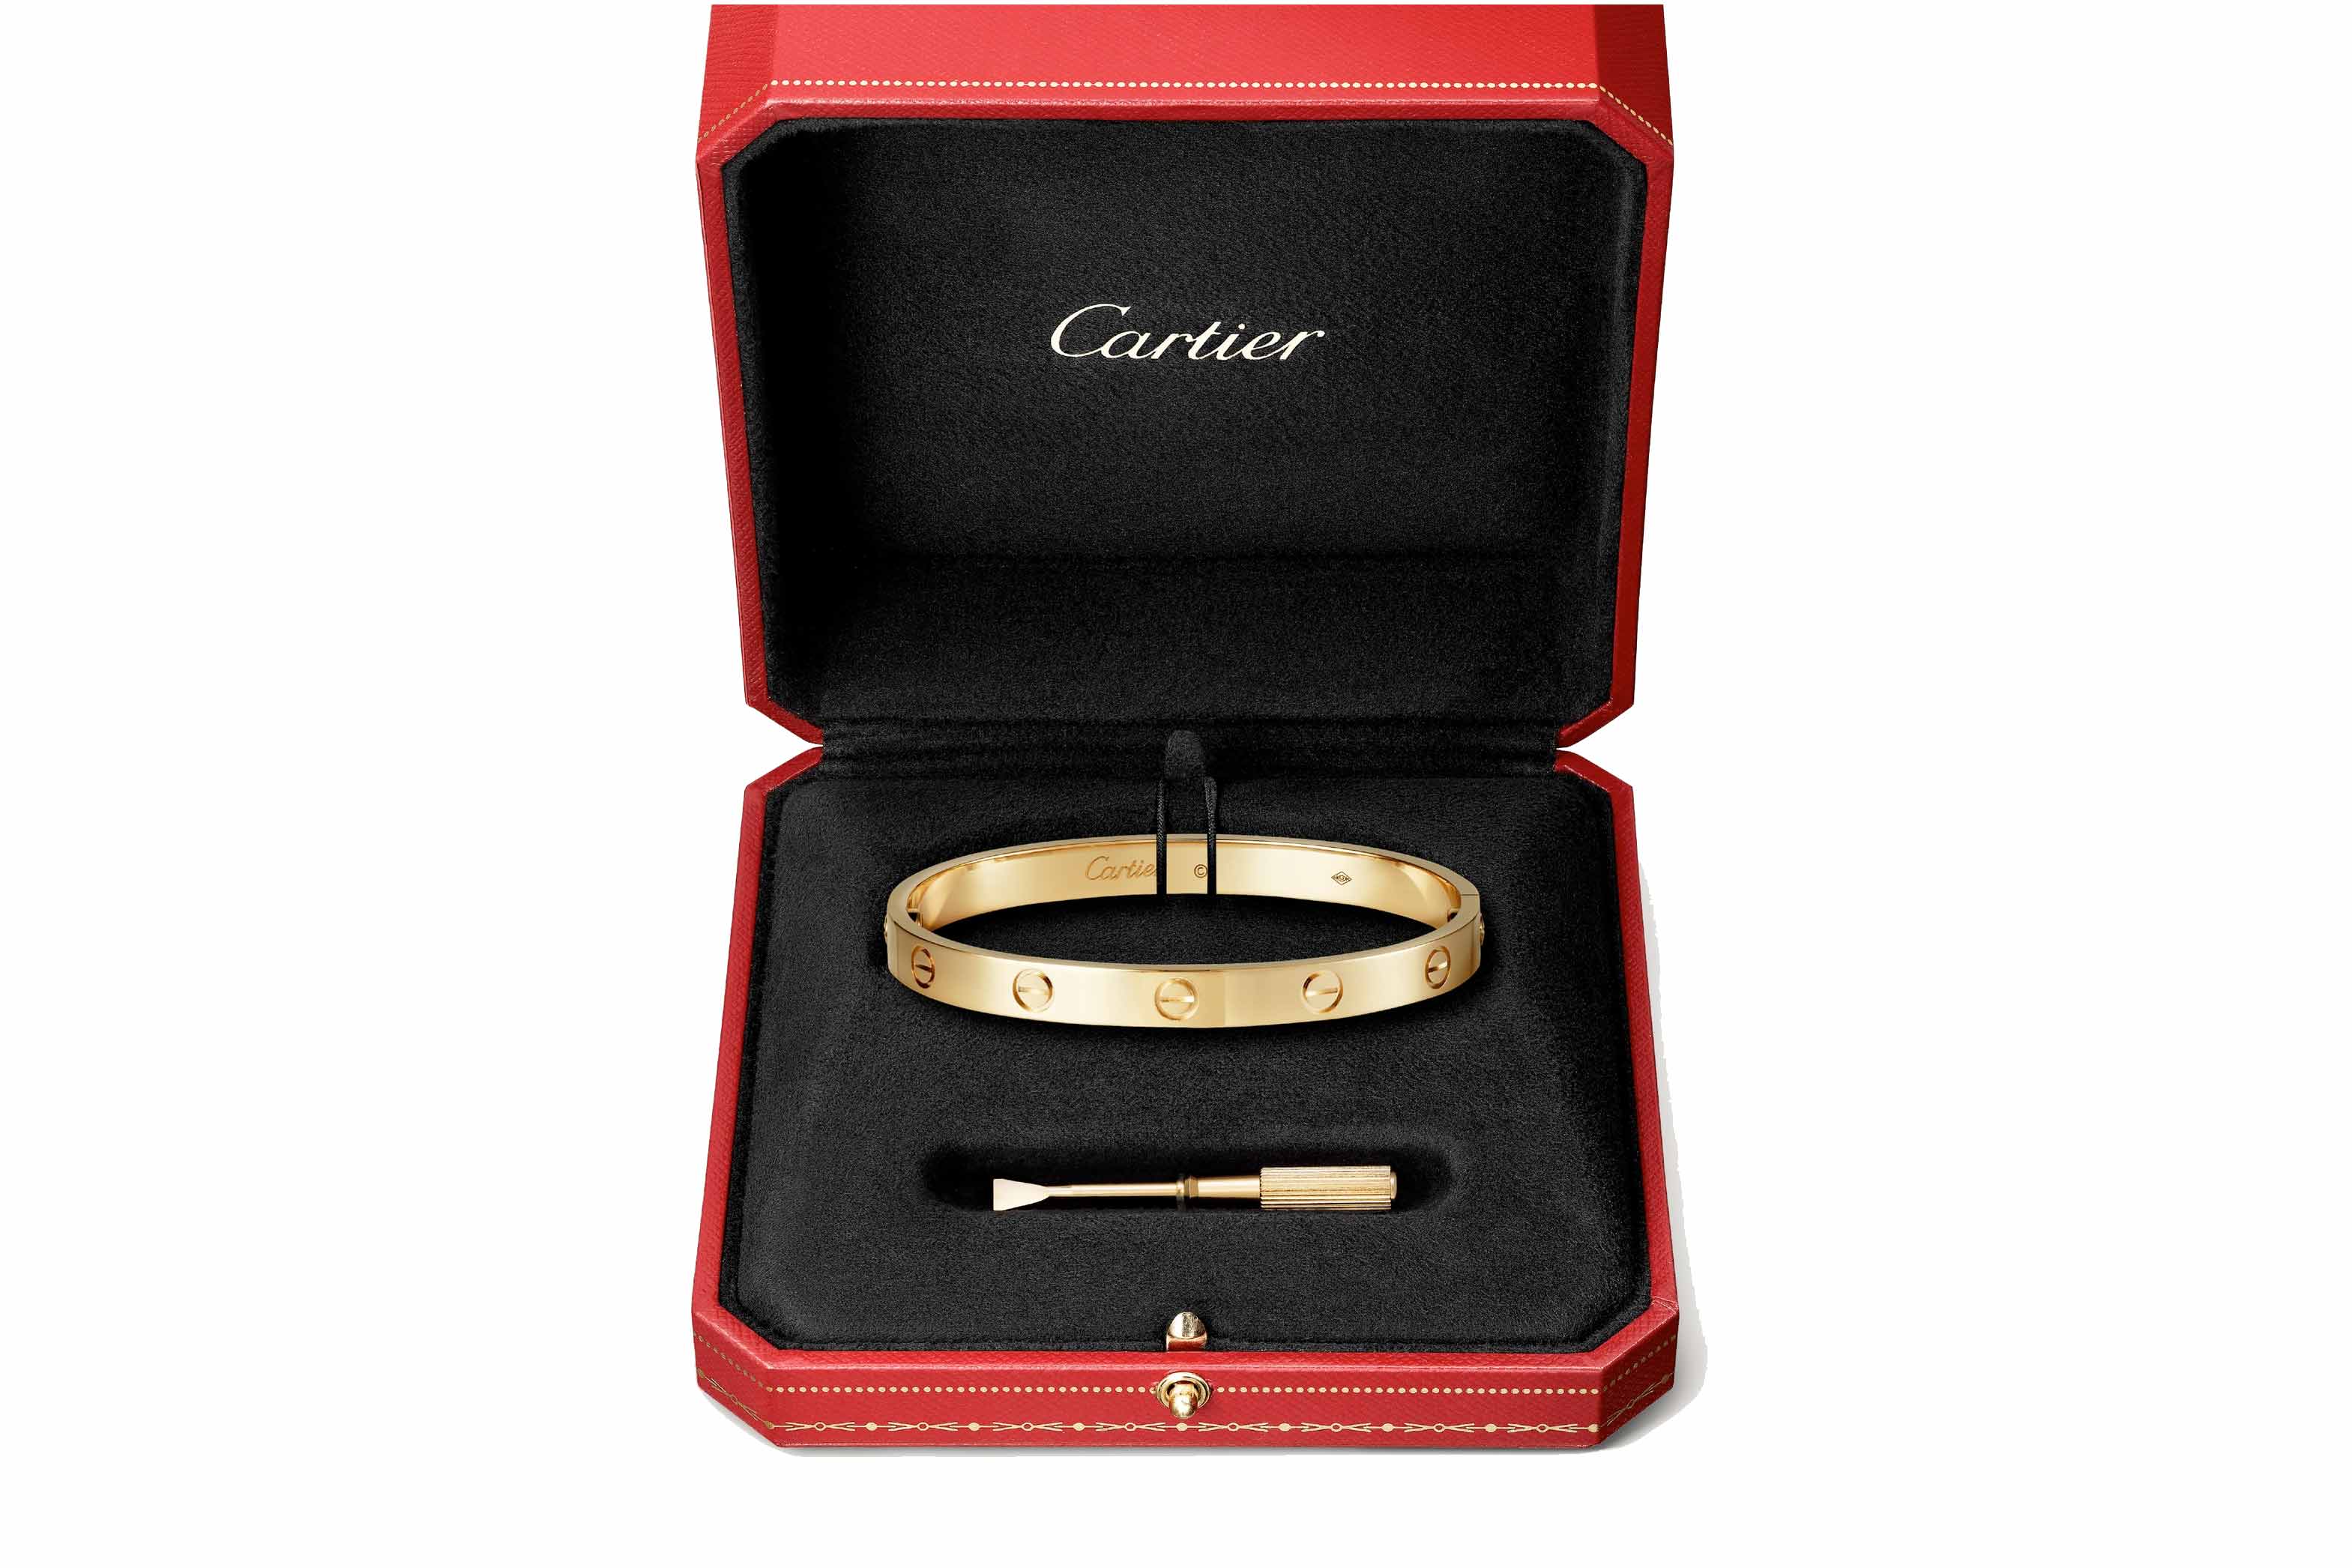 This new 18k gold love bracelet by Cartier comes with a screwdriver.